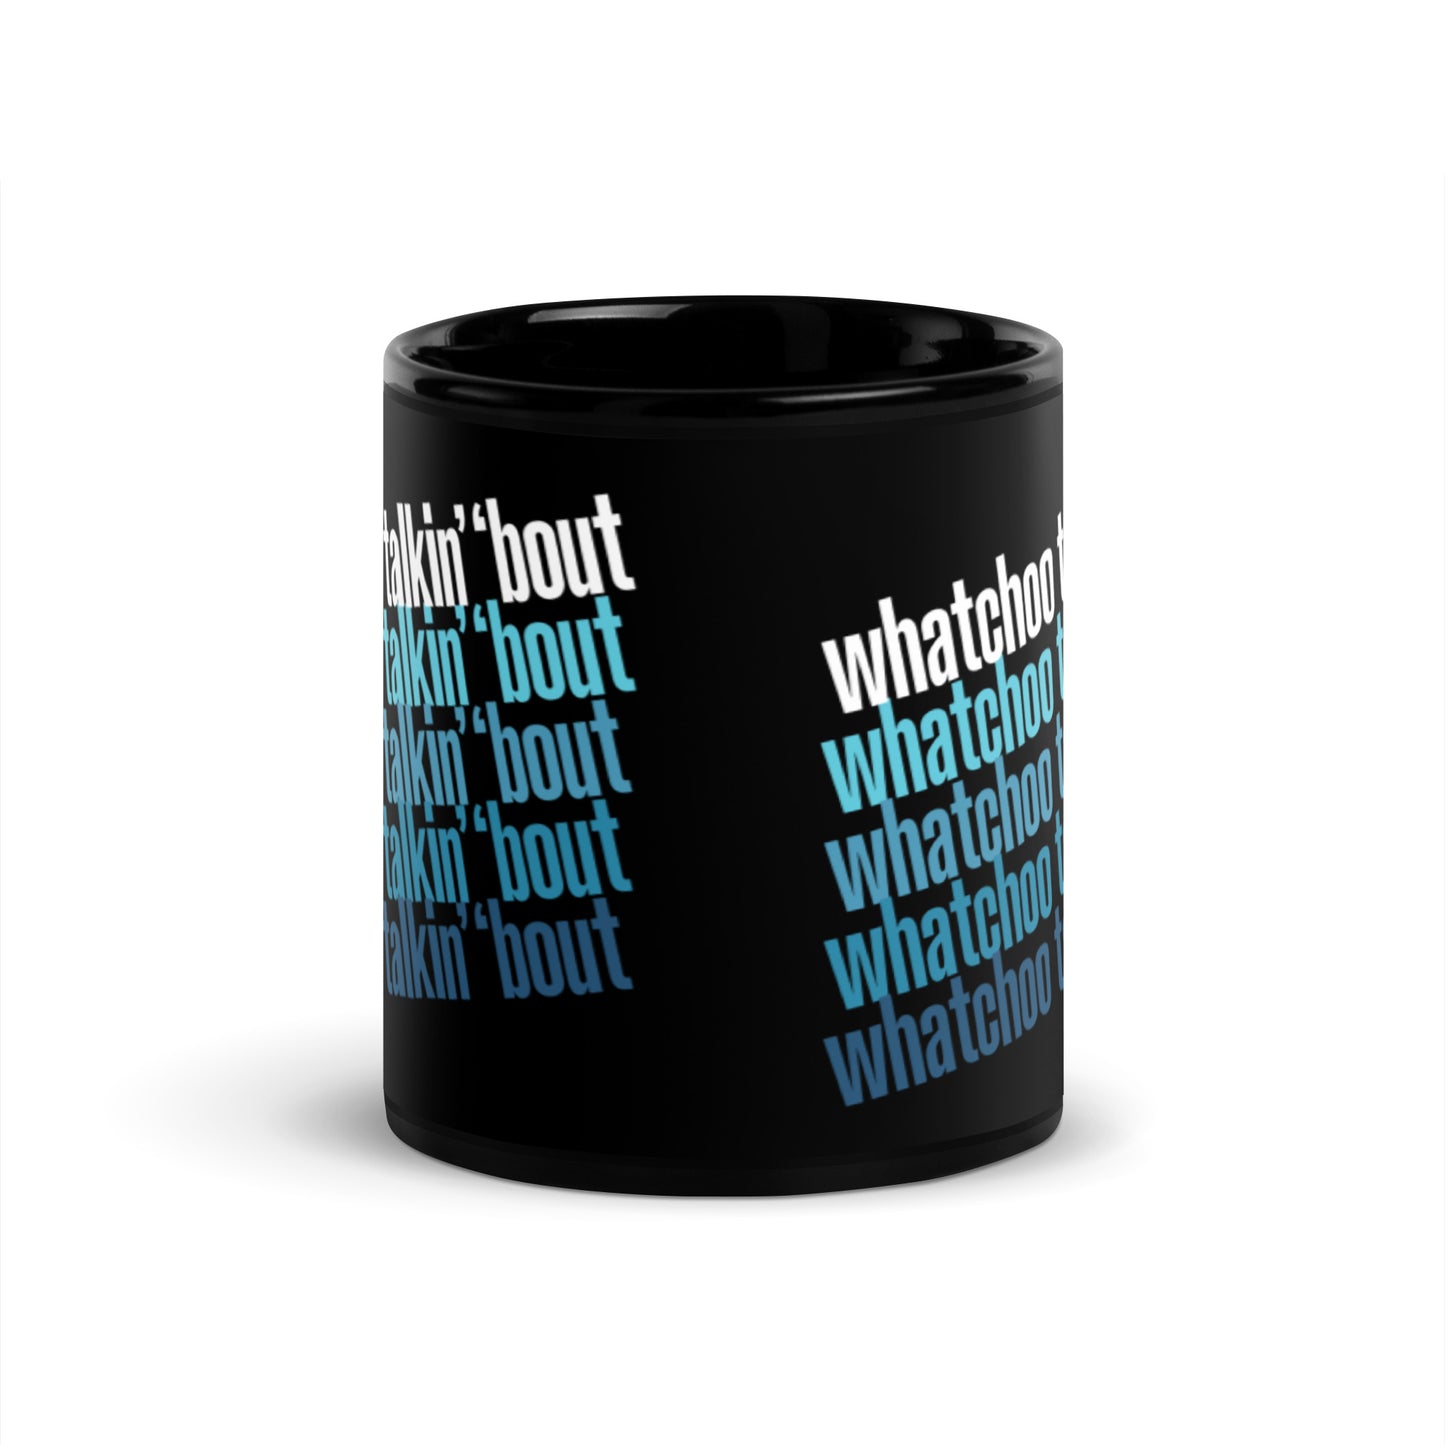 "Whatchoo Talkin Bout" Black Mug with Blue Repeat Pattern